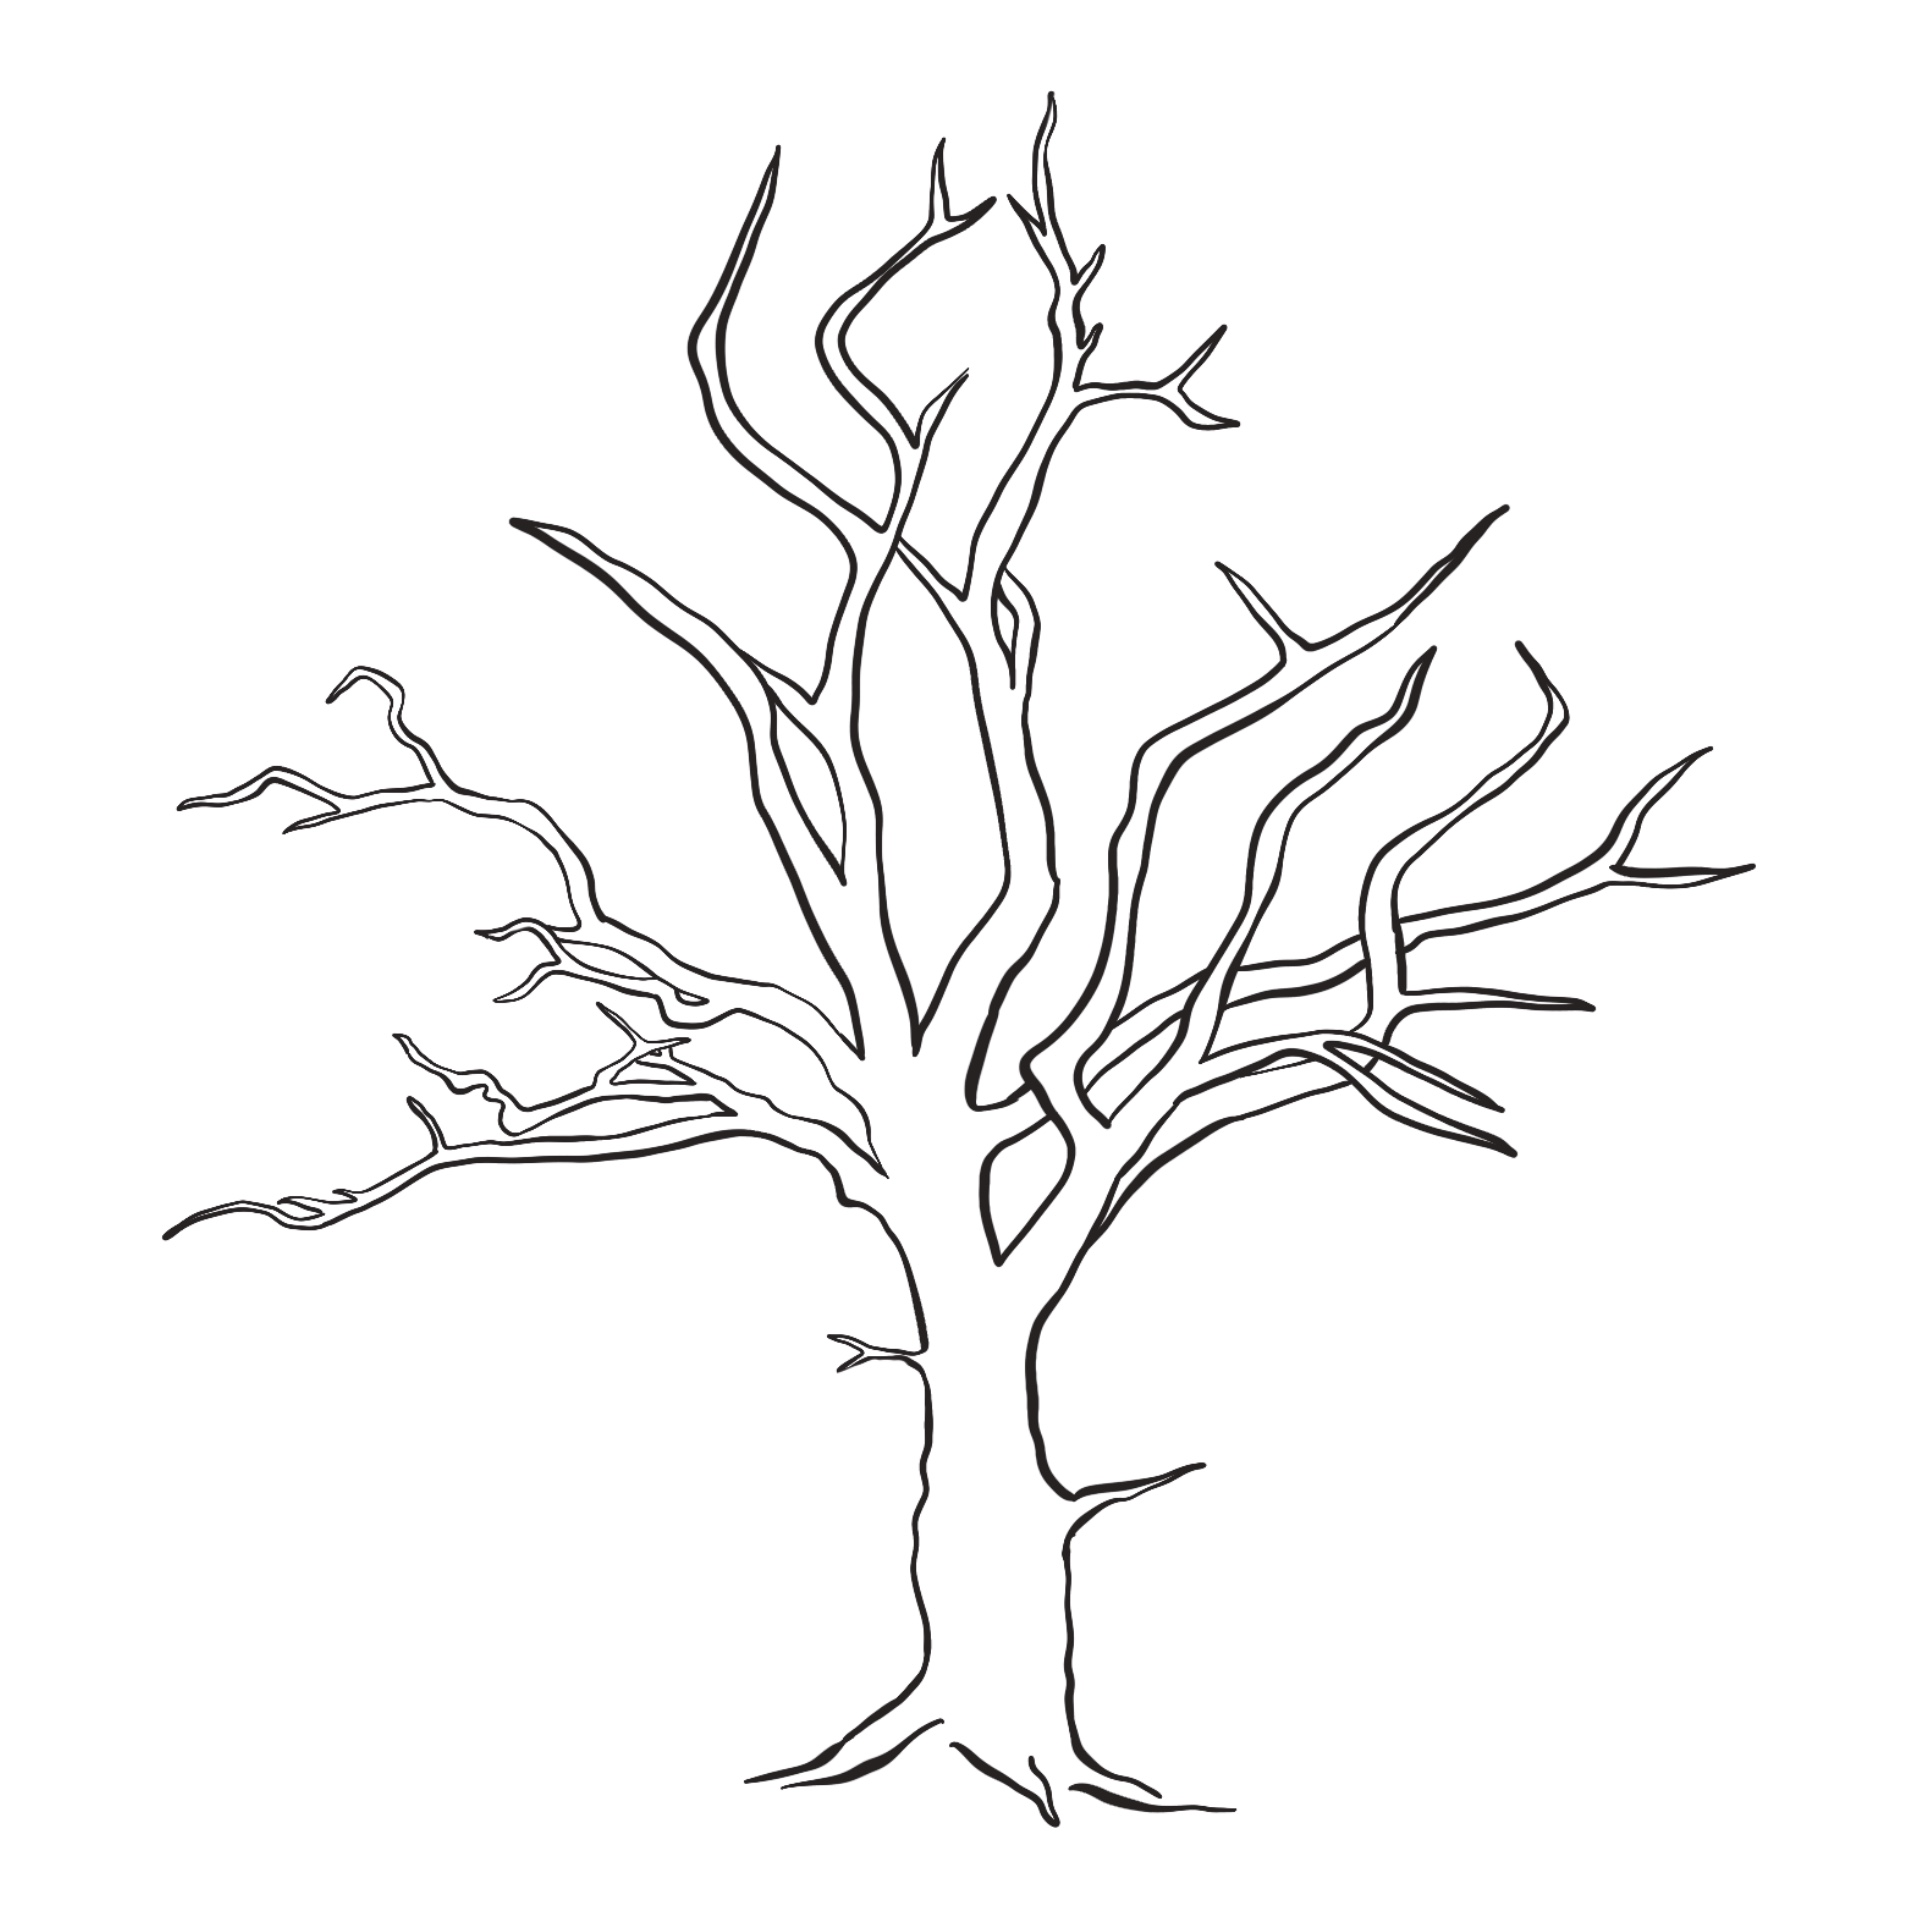 Tree without Leaves Coloring